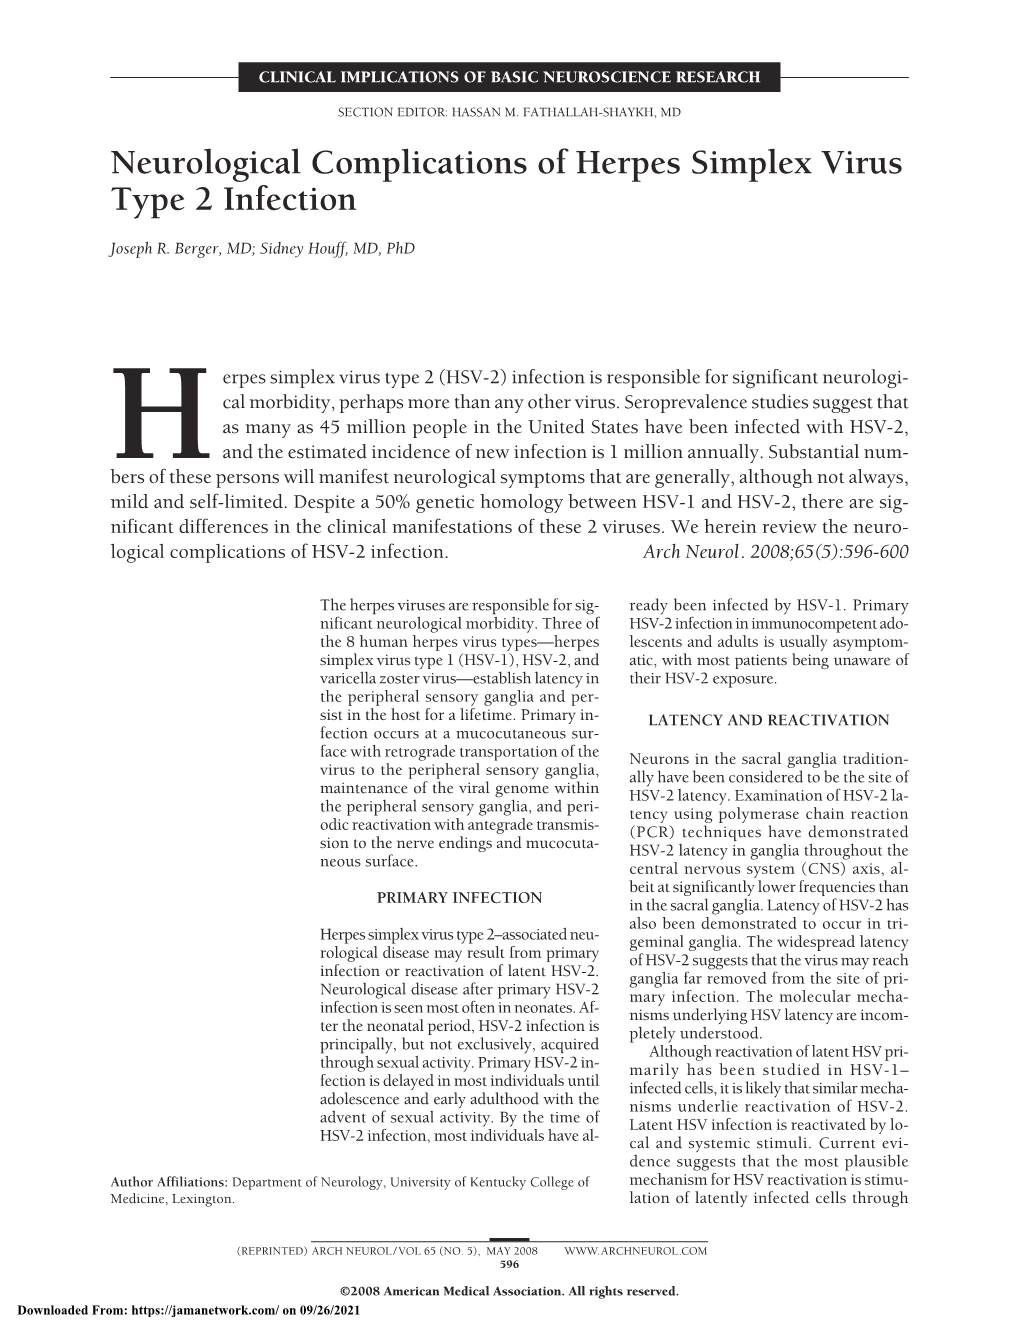 Neurological Complications of Herpes Simplex Virus Type 2 Infection